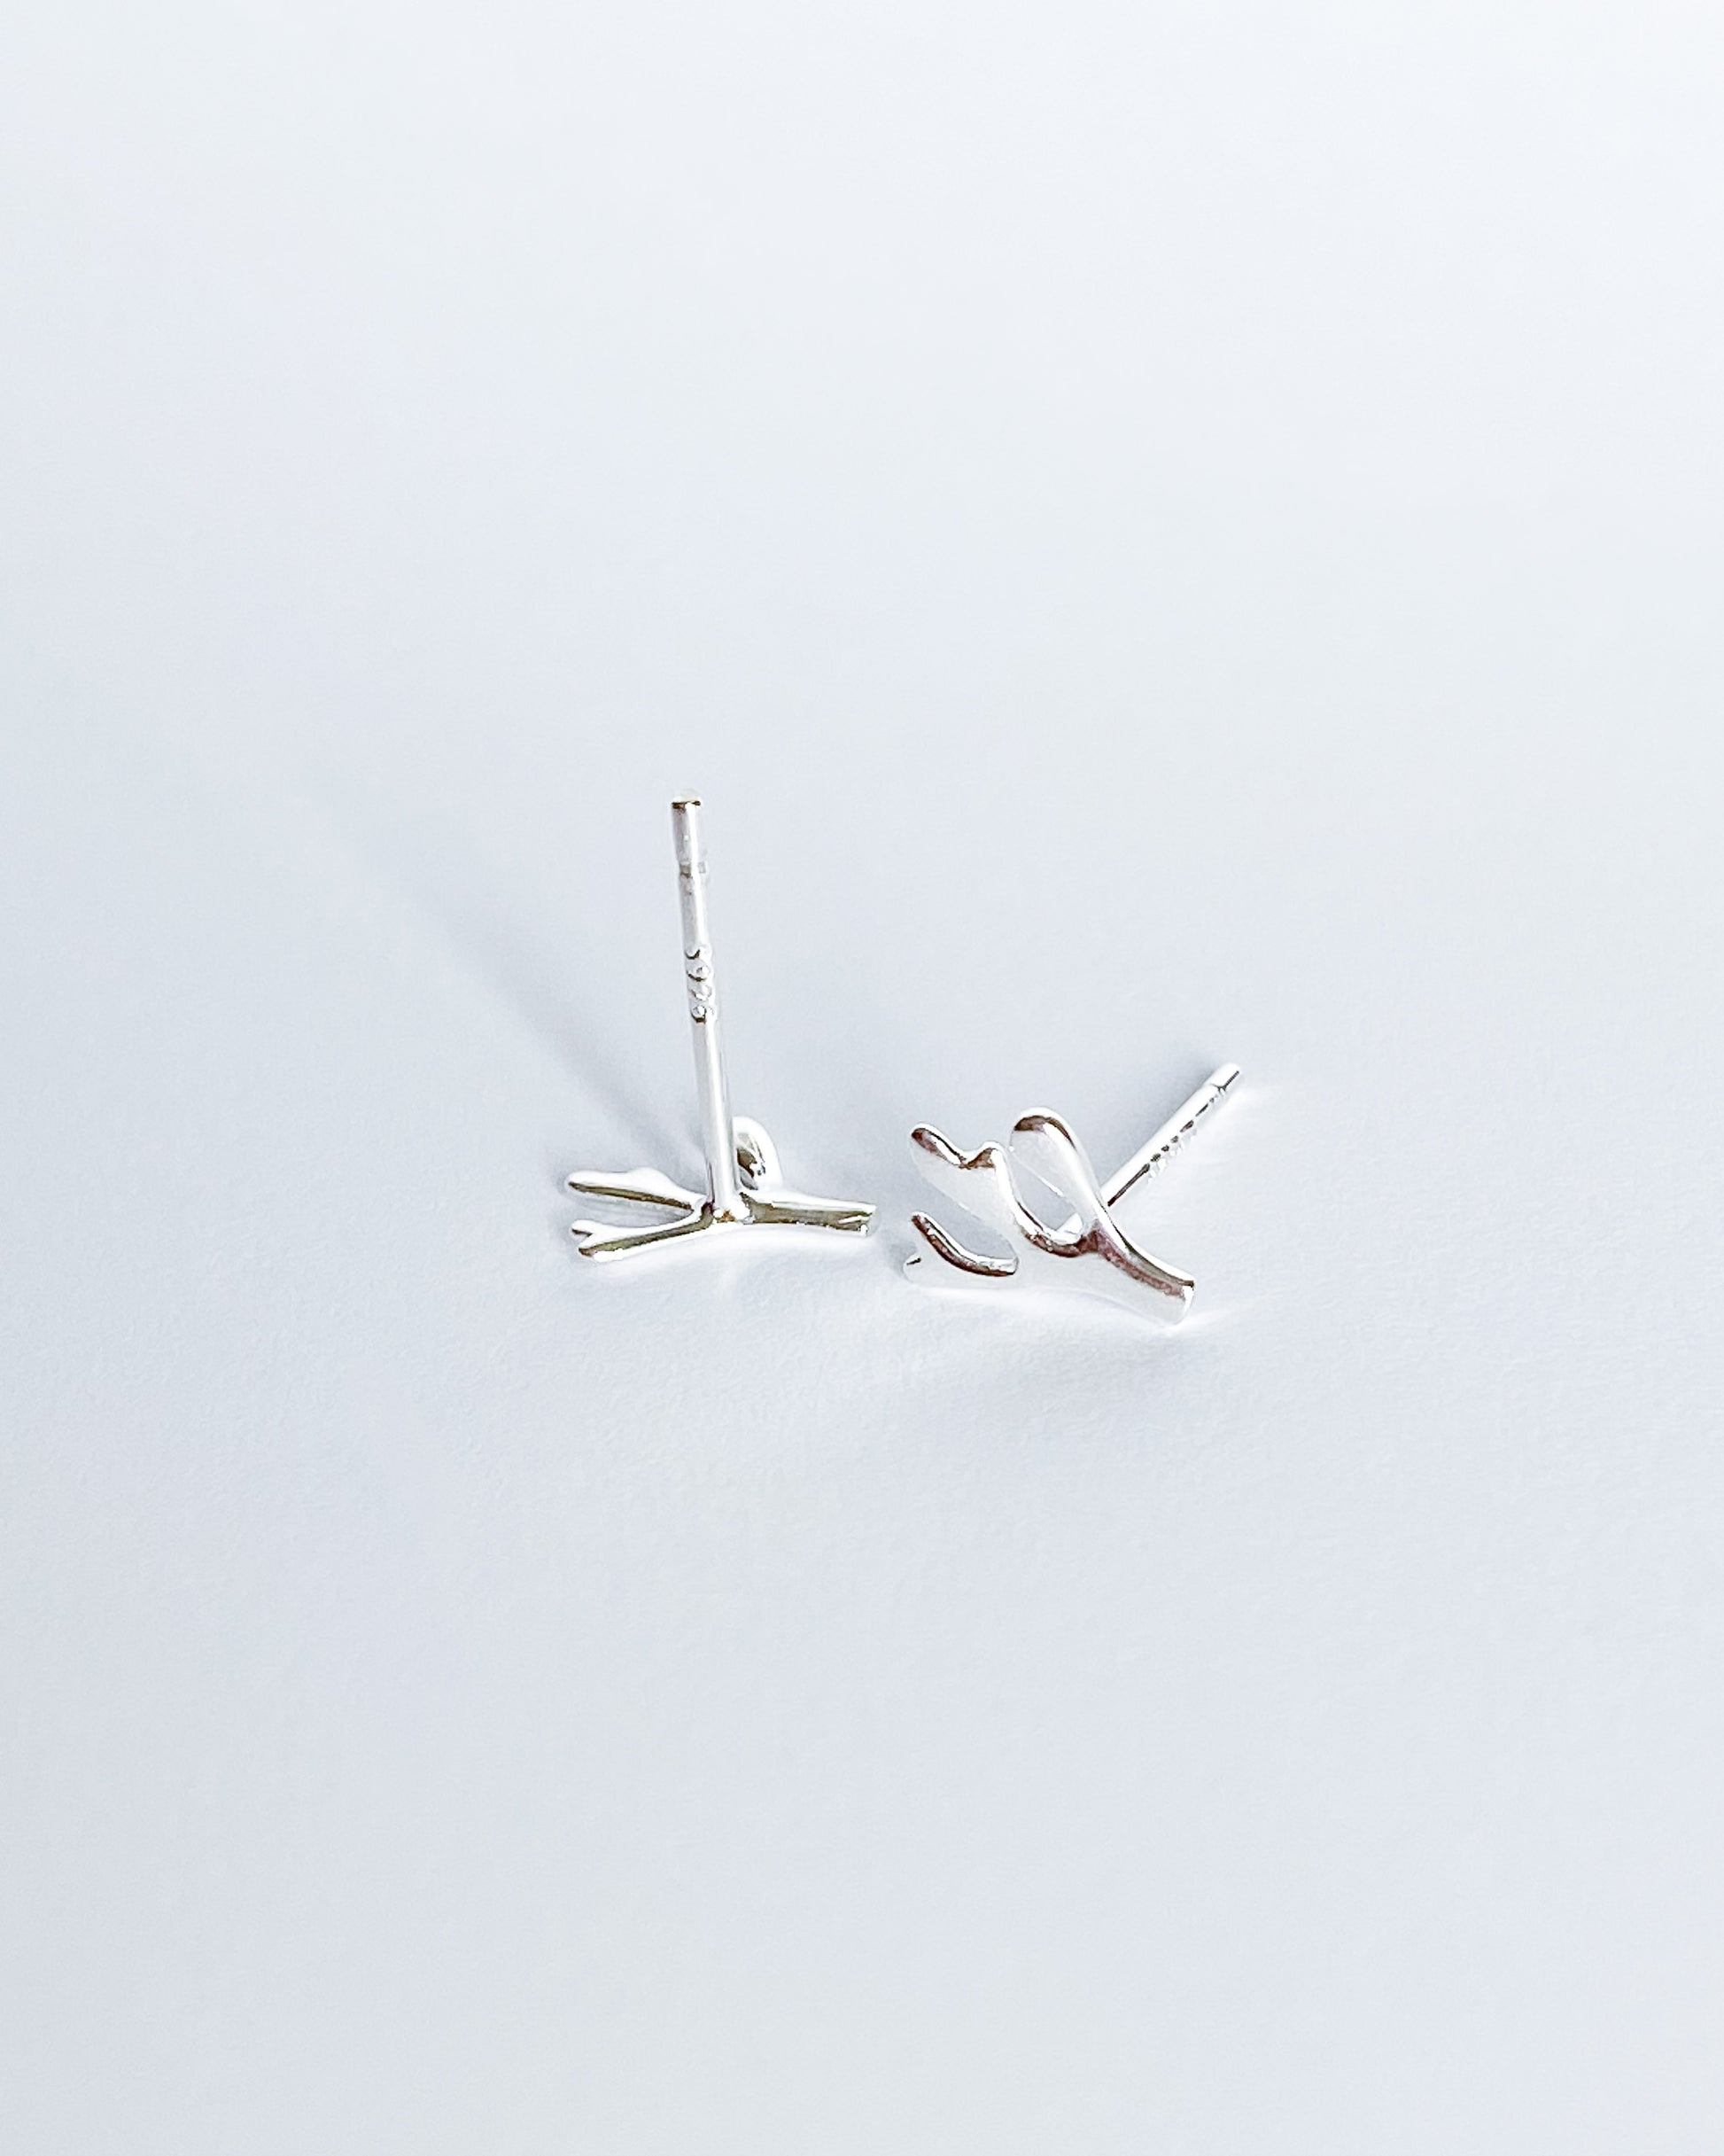 Tiny botanical earrings 925 sterling silver freeshipping - Ollijewelry